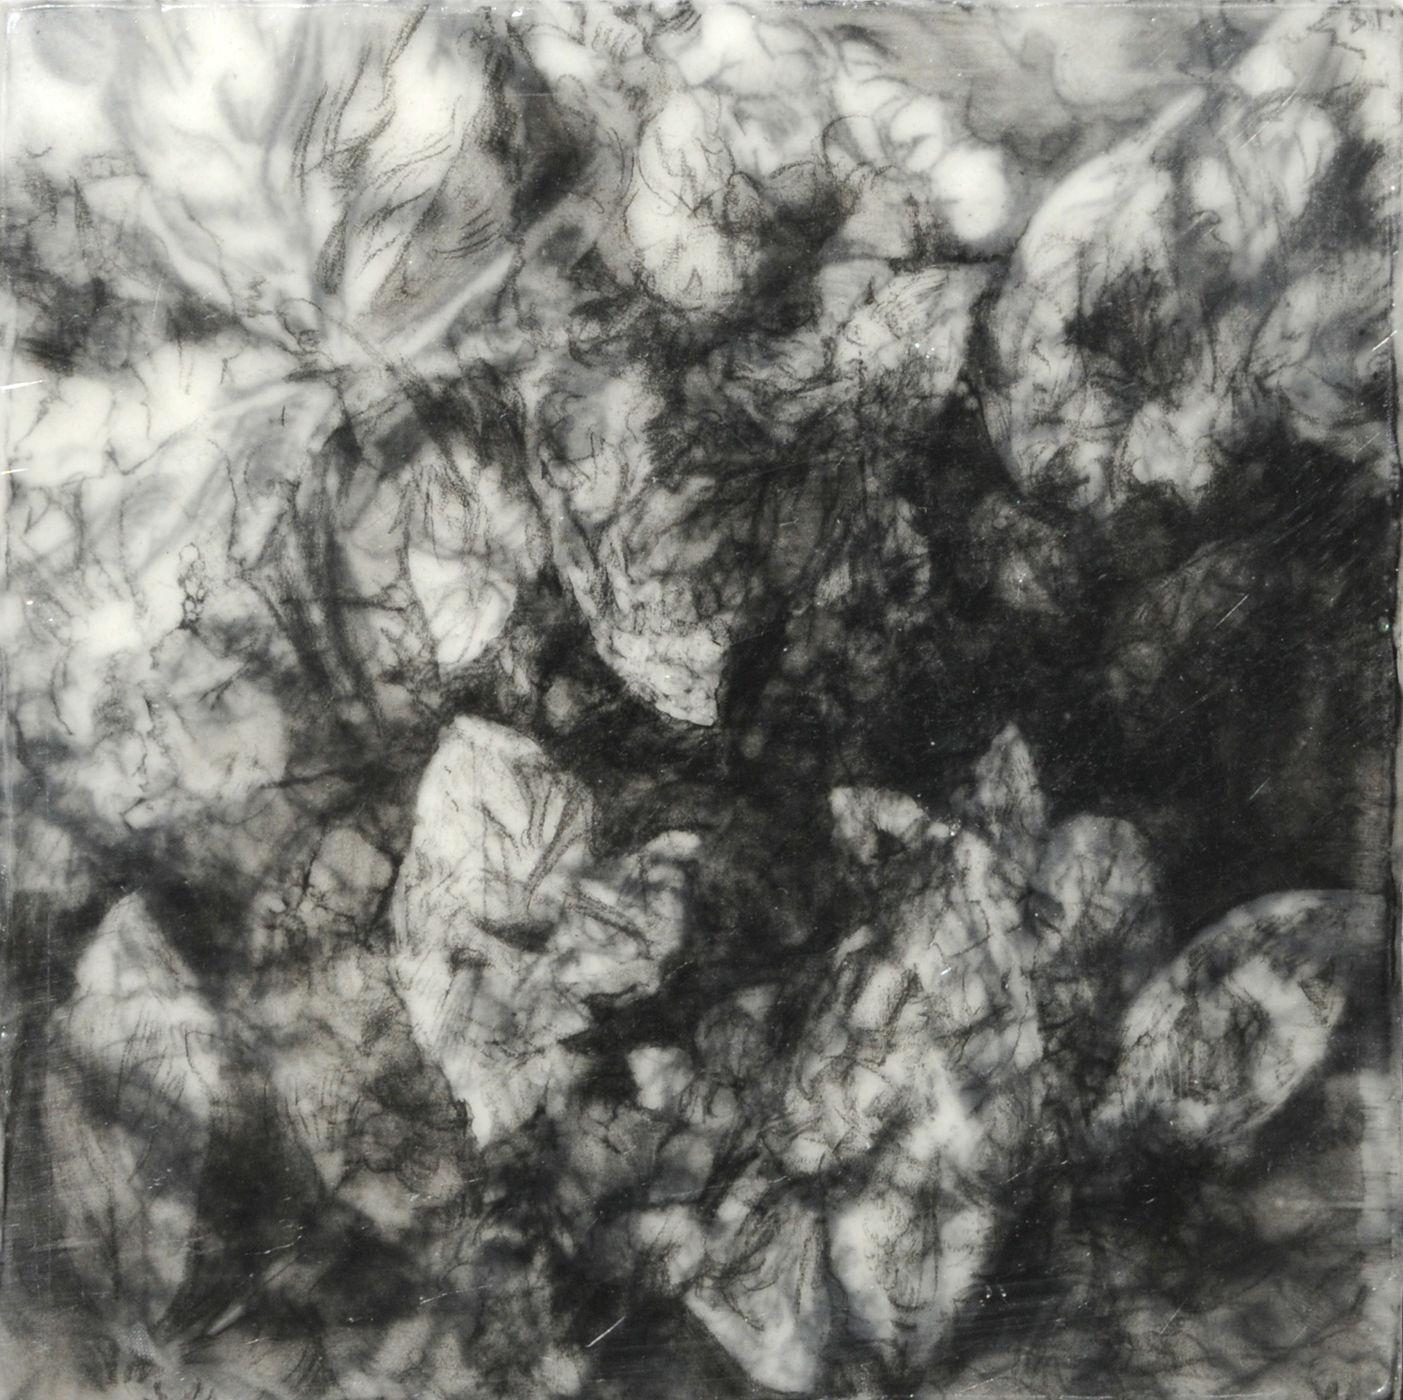 Robin Cole Still-Life Painting - "Traces V" Encaustic and Charcoal Painting